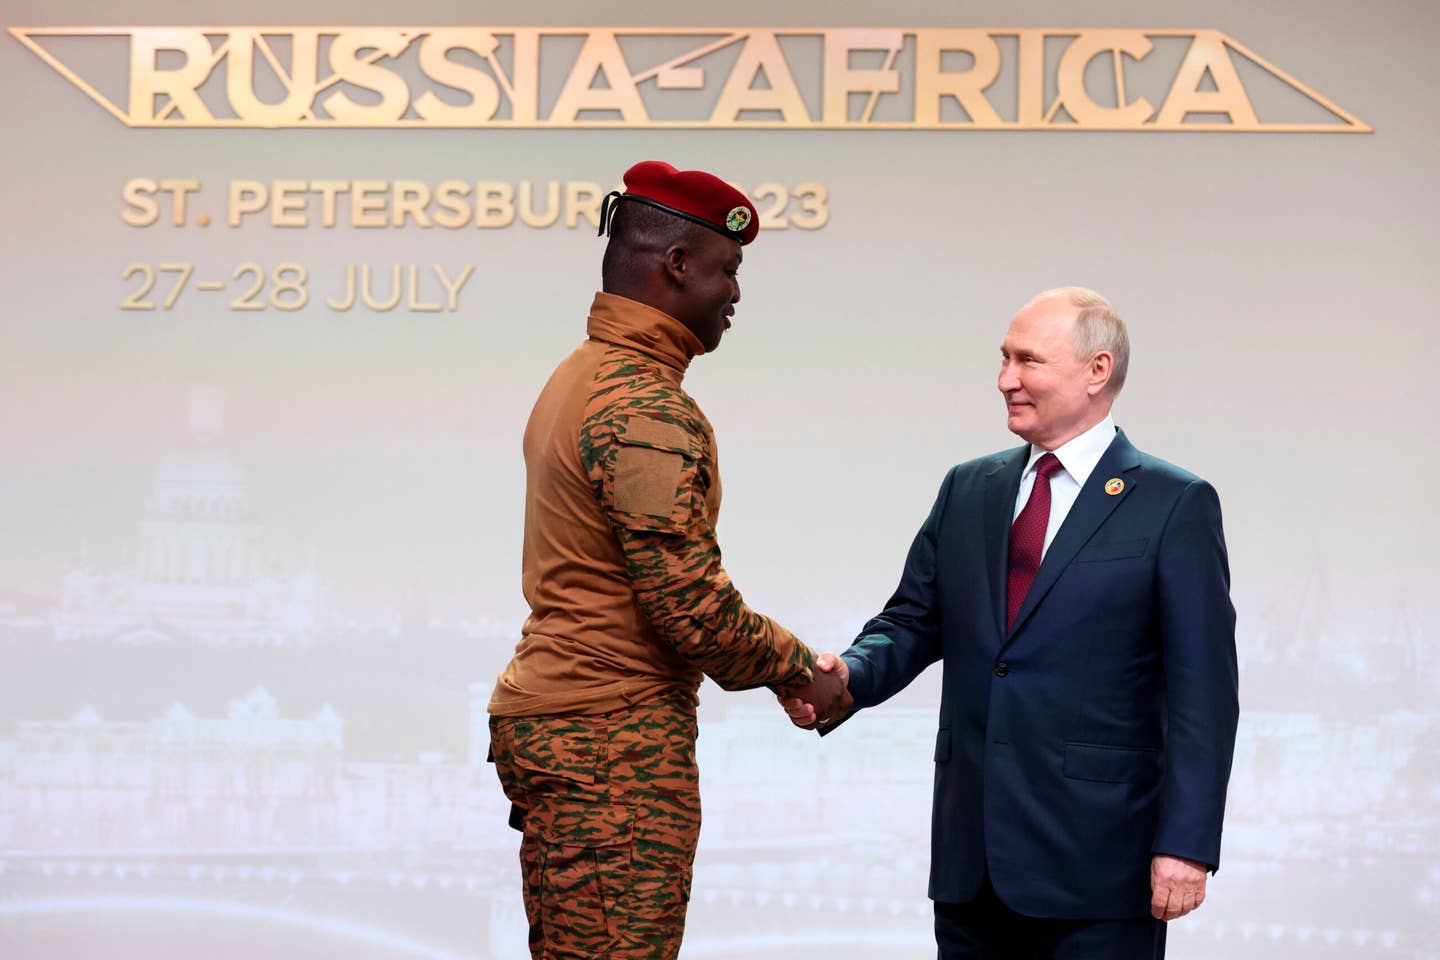 Burkina Faso's Capt. Ibrahim Traore, left, and Russian President Vladimir Putin shake hands before an official ceremony to welcome the leaders of delegations to the Russia Africa Summit in St. Petersburg, Russia, Thursday, July 27, 2023. (Sergei Bobylev/TASS Host Photo Agency Pool Photo via AP)